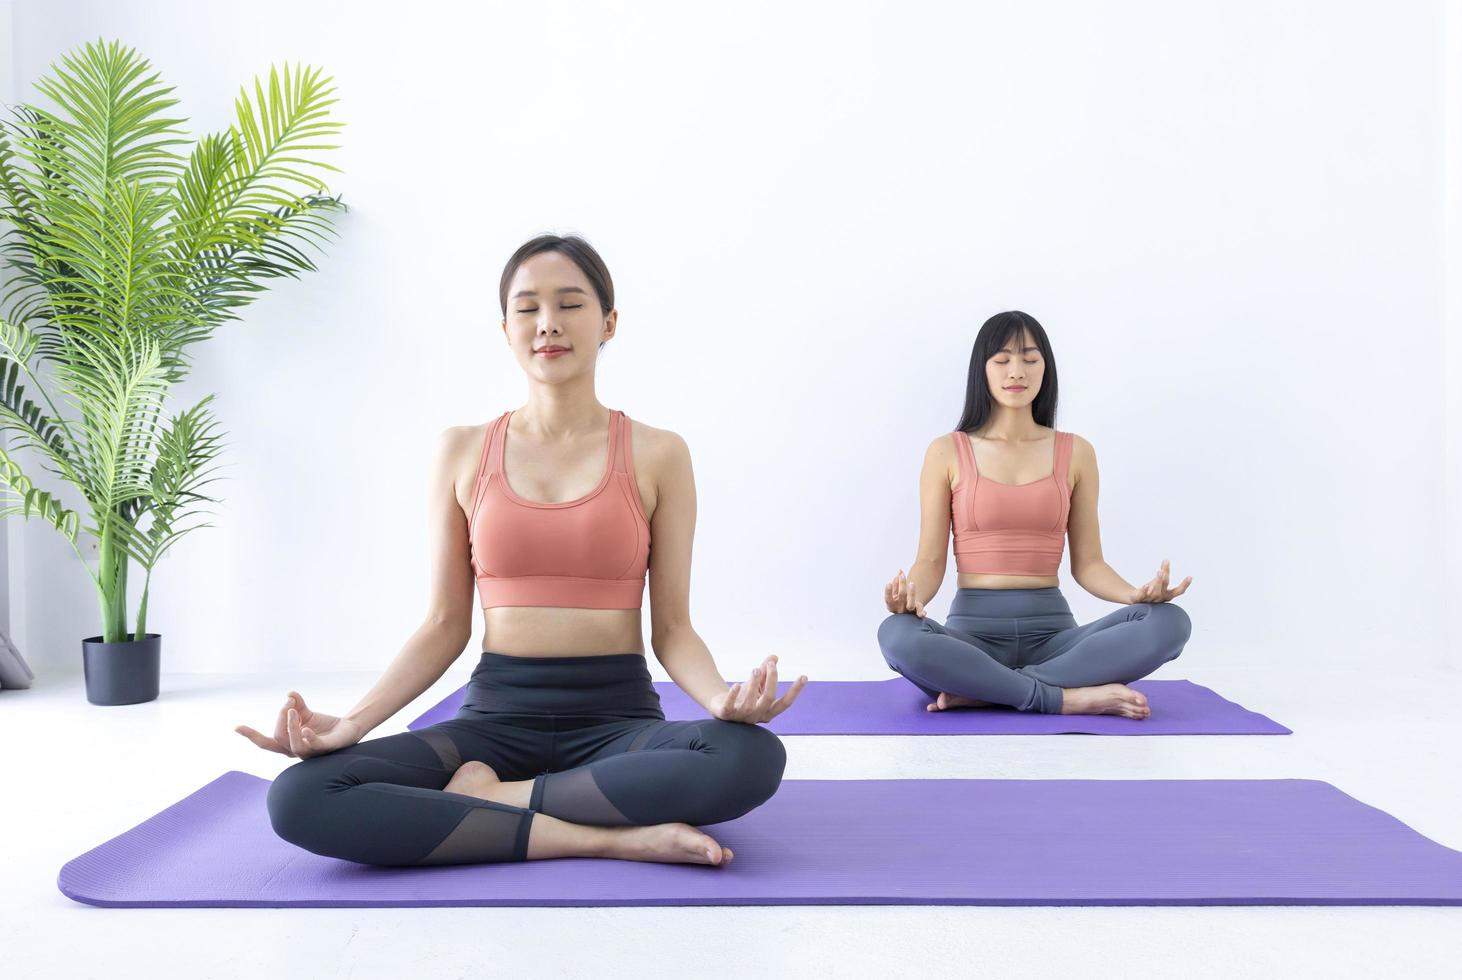 Asian woman practicing yoga indoor with easy and simple position to control breathing in and out in meditation pose photo